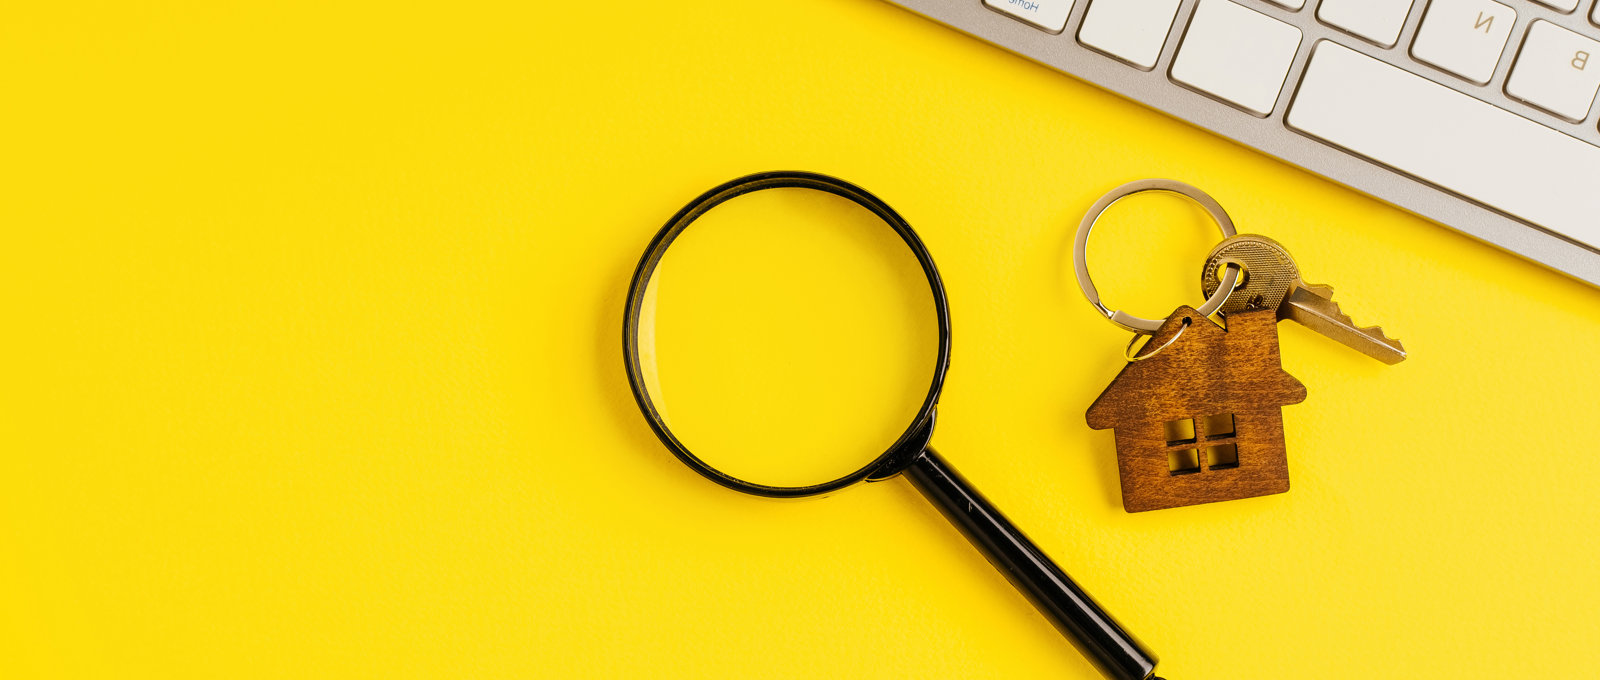 photo of a magnifying glass, a set of house keys, and a keyboard on a bright yellow surface